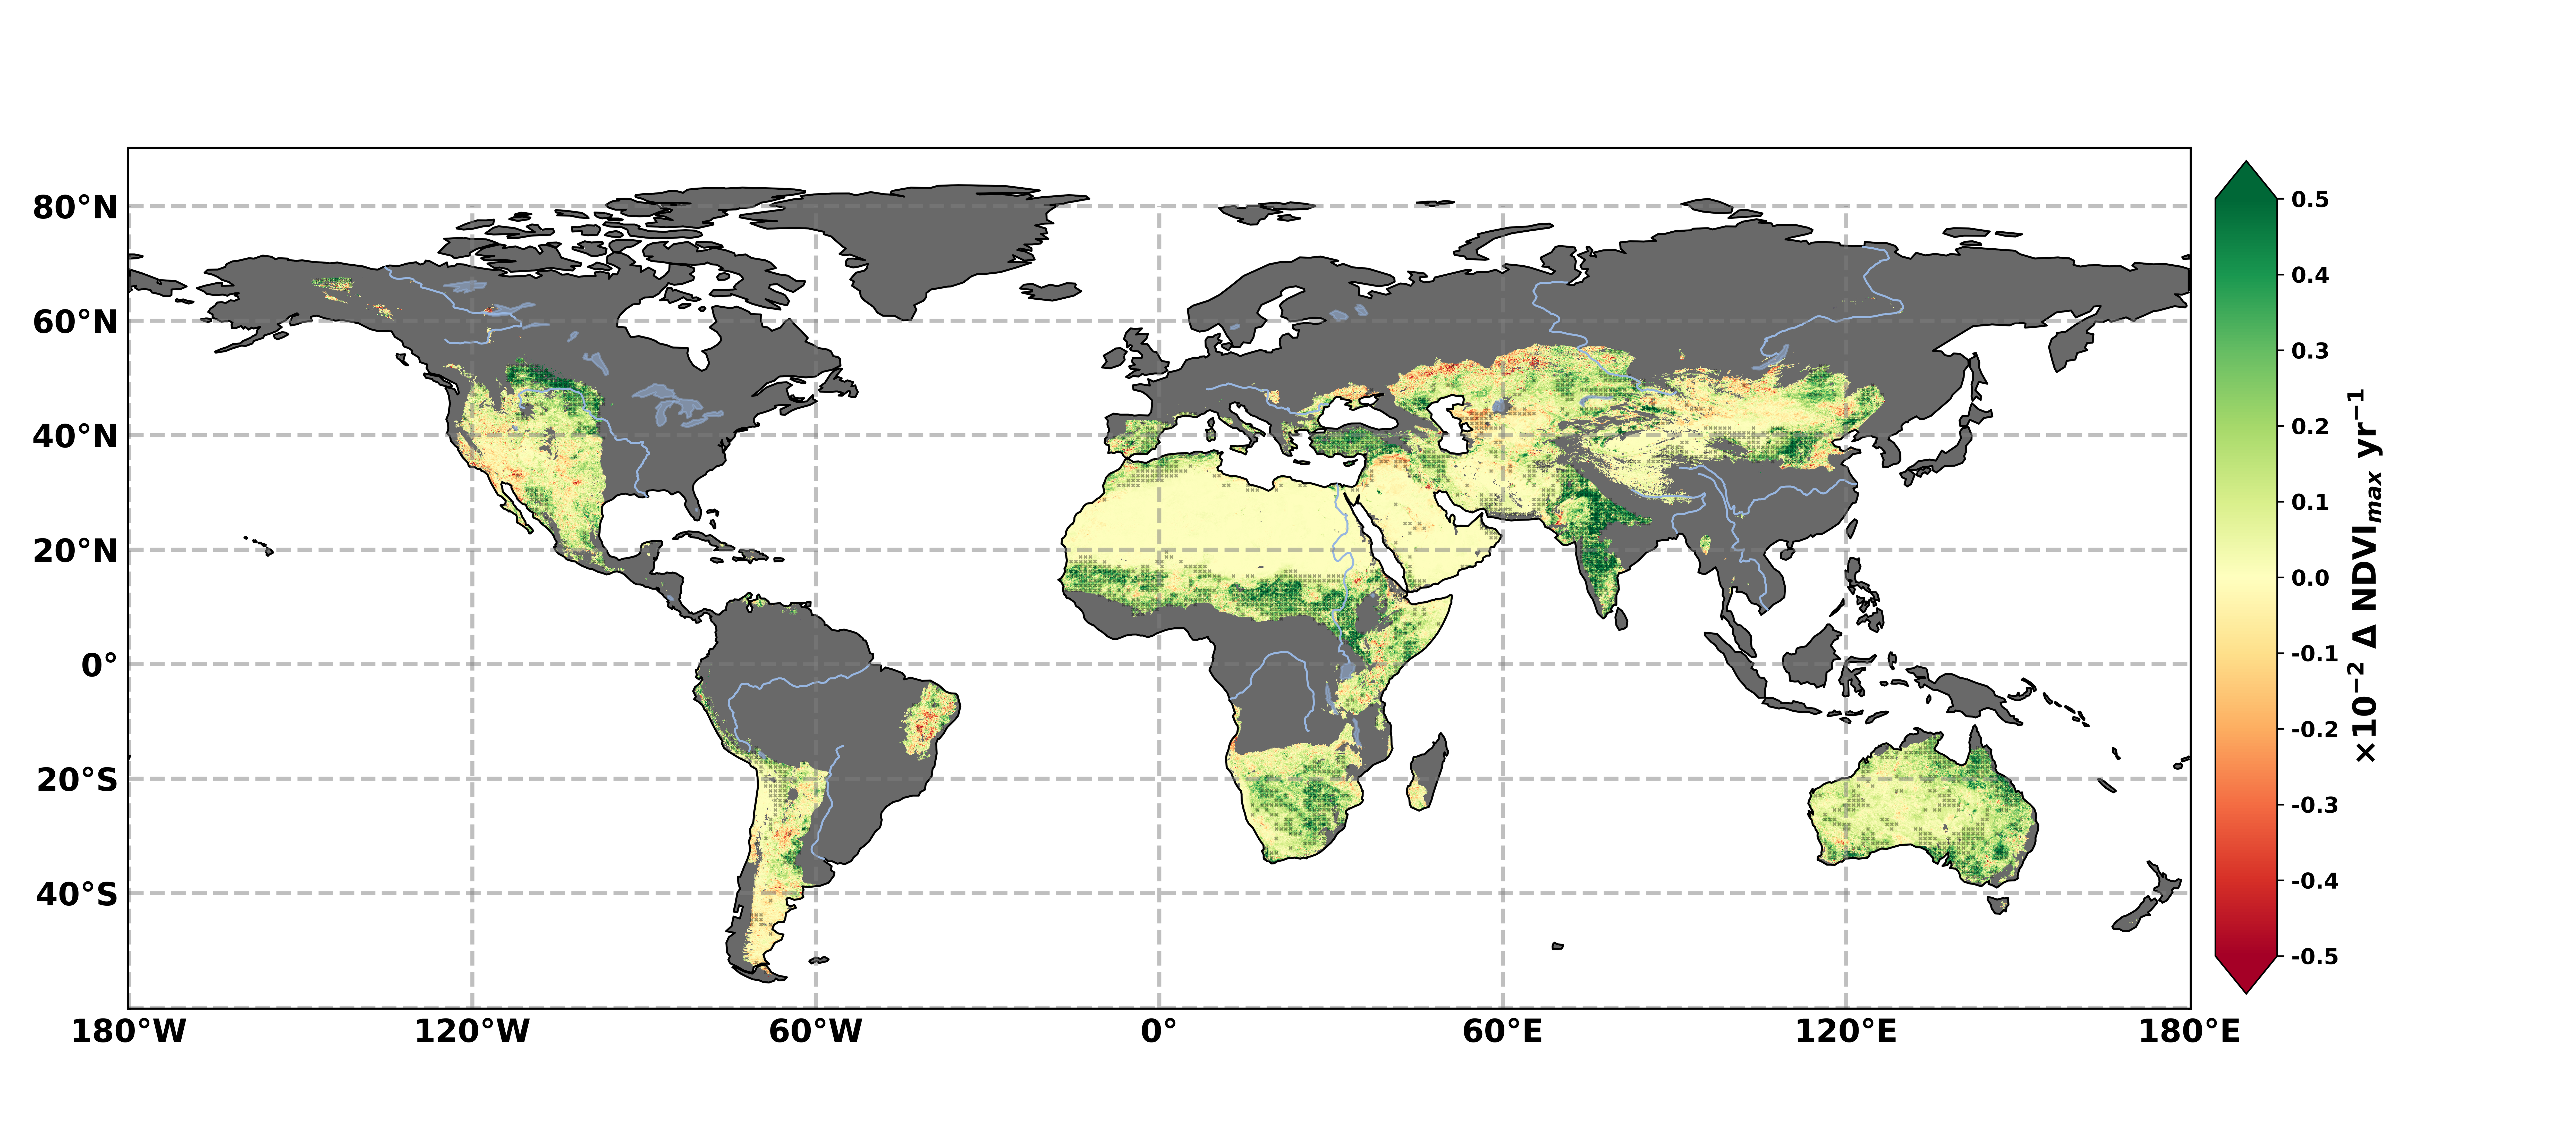 Plant species reported for human health usage in Central and East